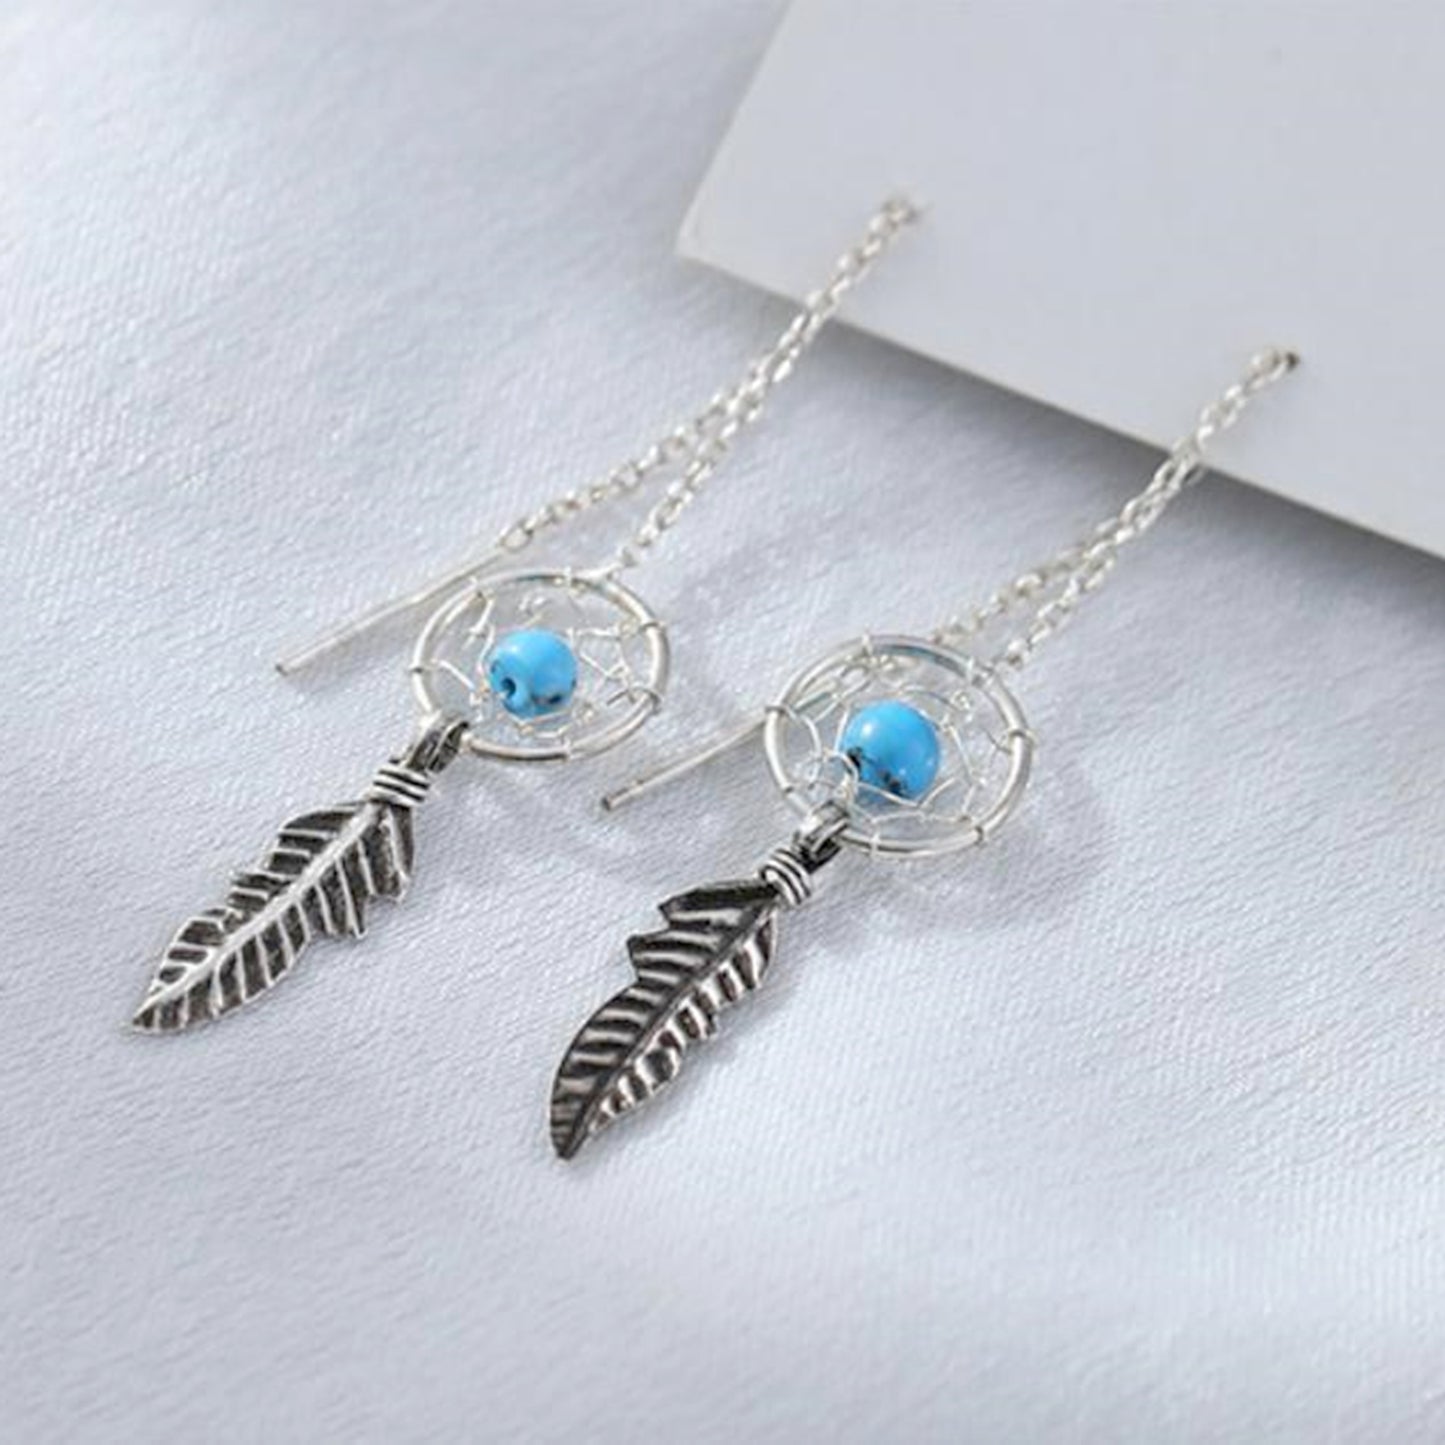 Sterling Silver Oxidized Dream Catcher Wing Feather Bead Ball Threader Earrings - Thread Ball Earrings